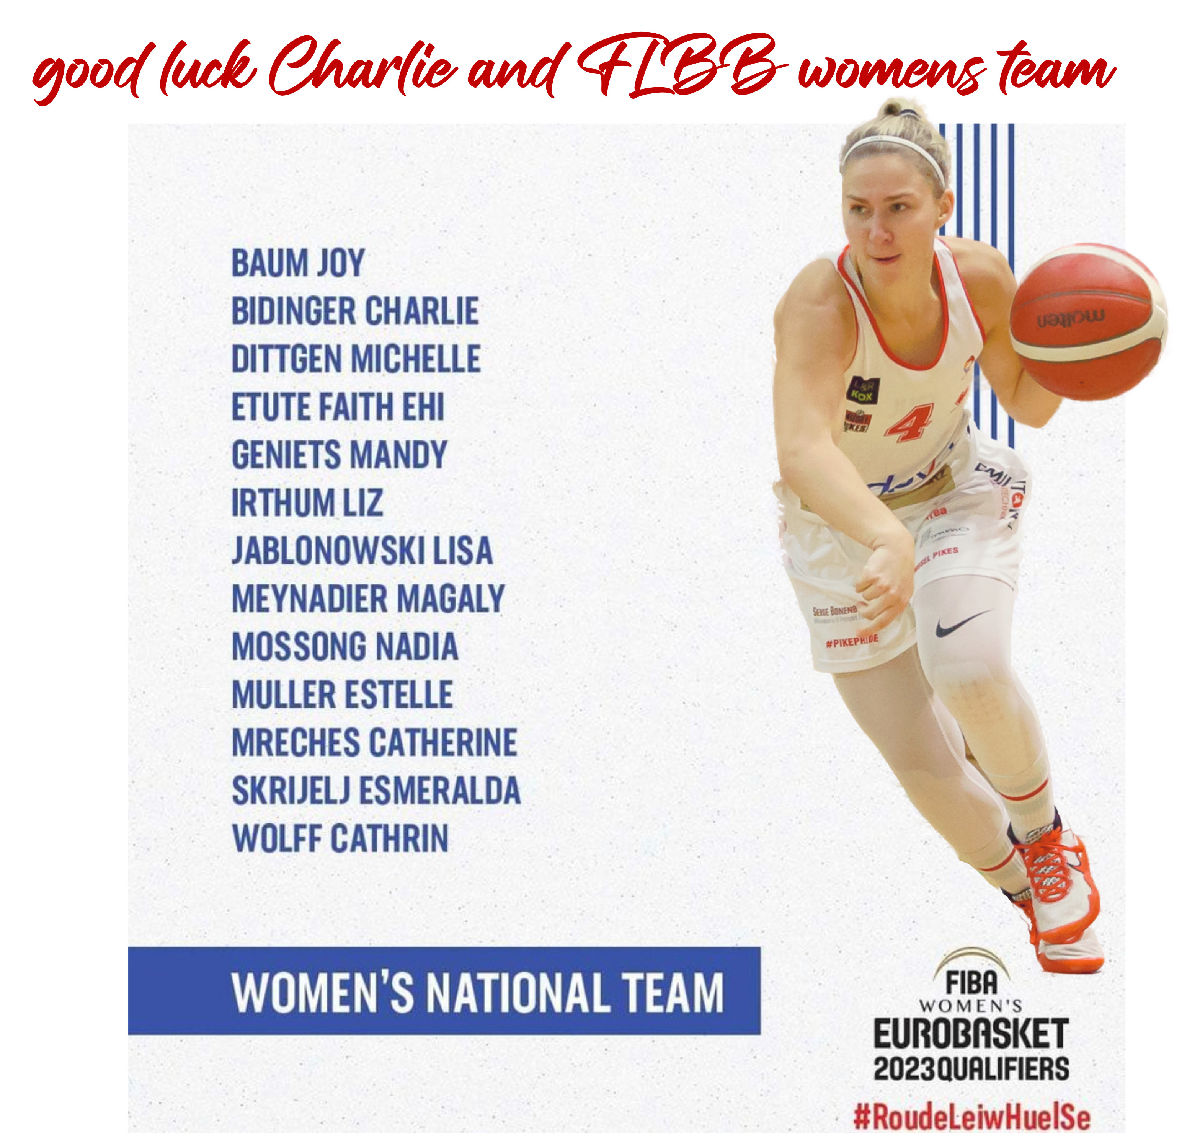 FLBB women Luxembourg-Switzerland today at 7 pm in Coque-Kirchberg